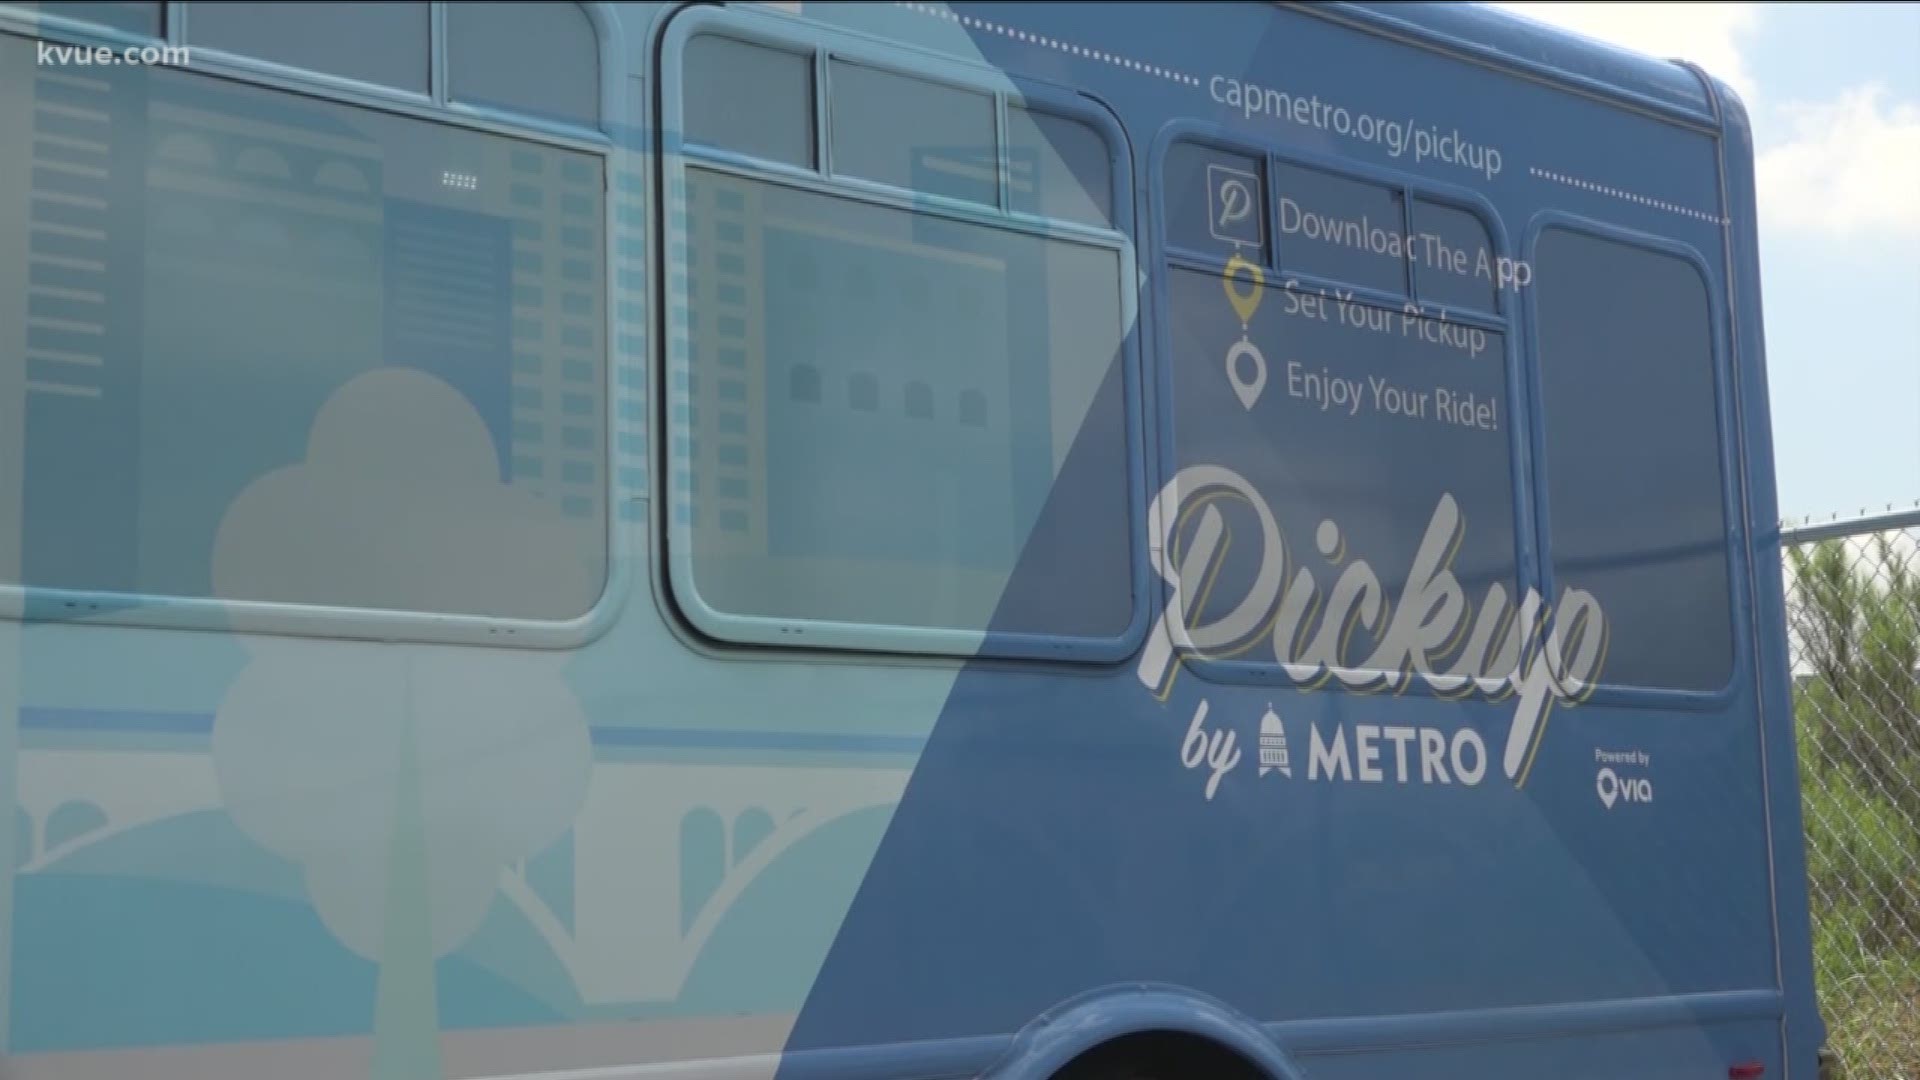 CapMetro has launched a new service that allows riders to request a ride on-demand.